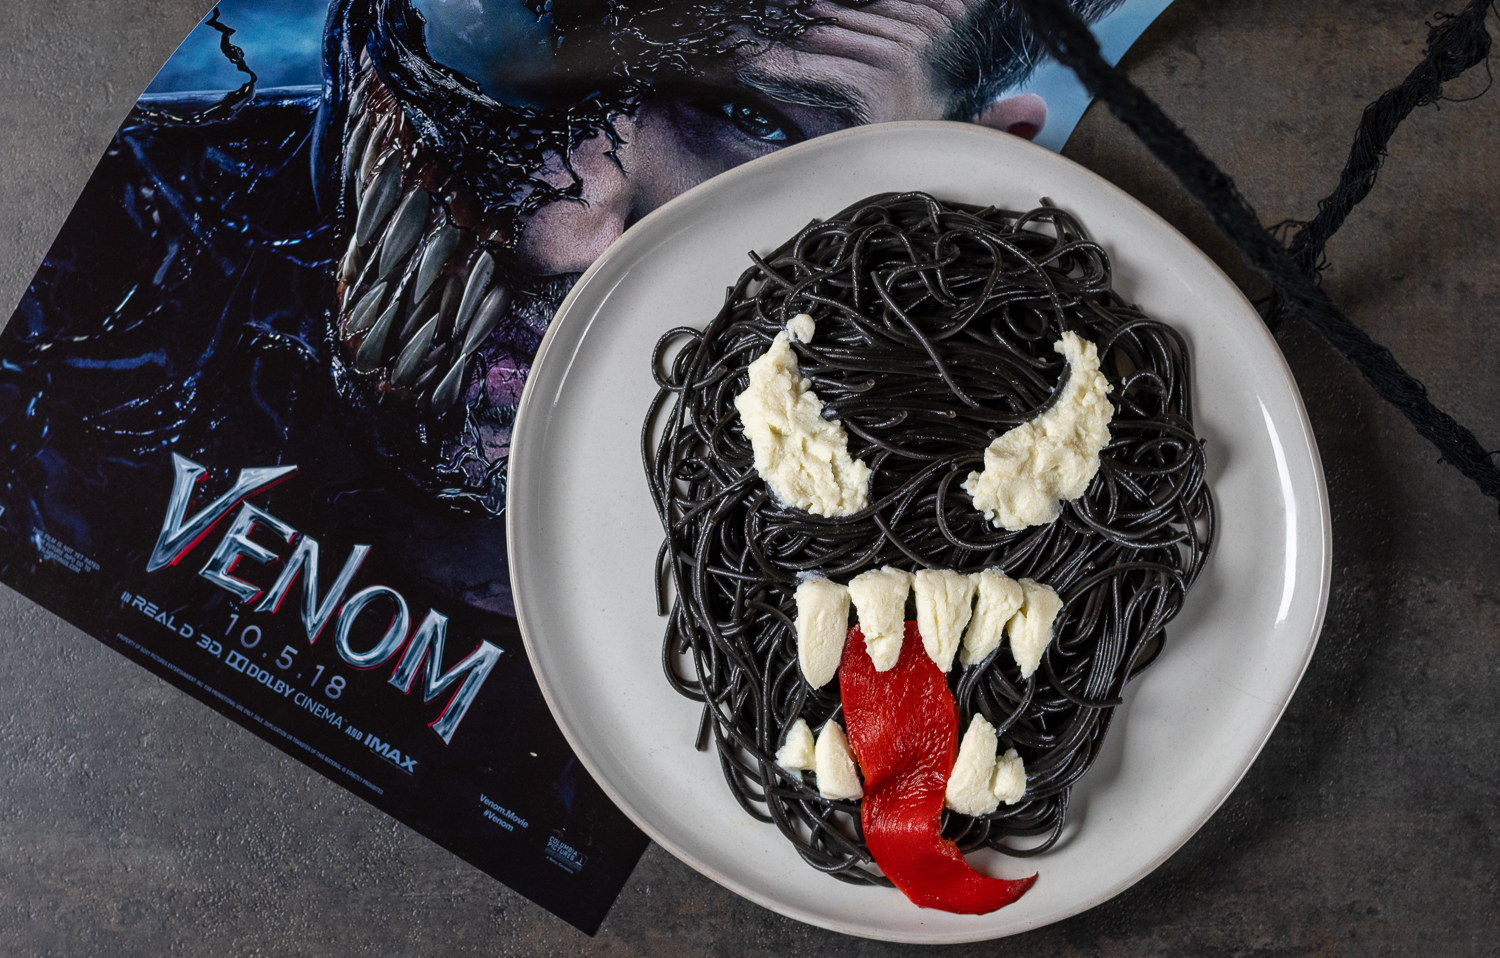 Marvel Recipes | Pasta | Venom Recipes | Geeky Recipes | Vegetarian | To celebrate the release of Venom, The Geeks have created a recipe for Symbiote Spaghetti inspired by the movie and comics. 2geekswhoeat.com